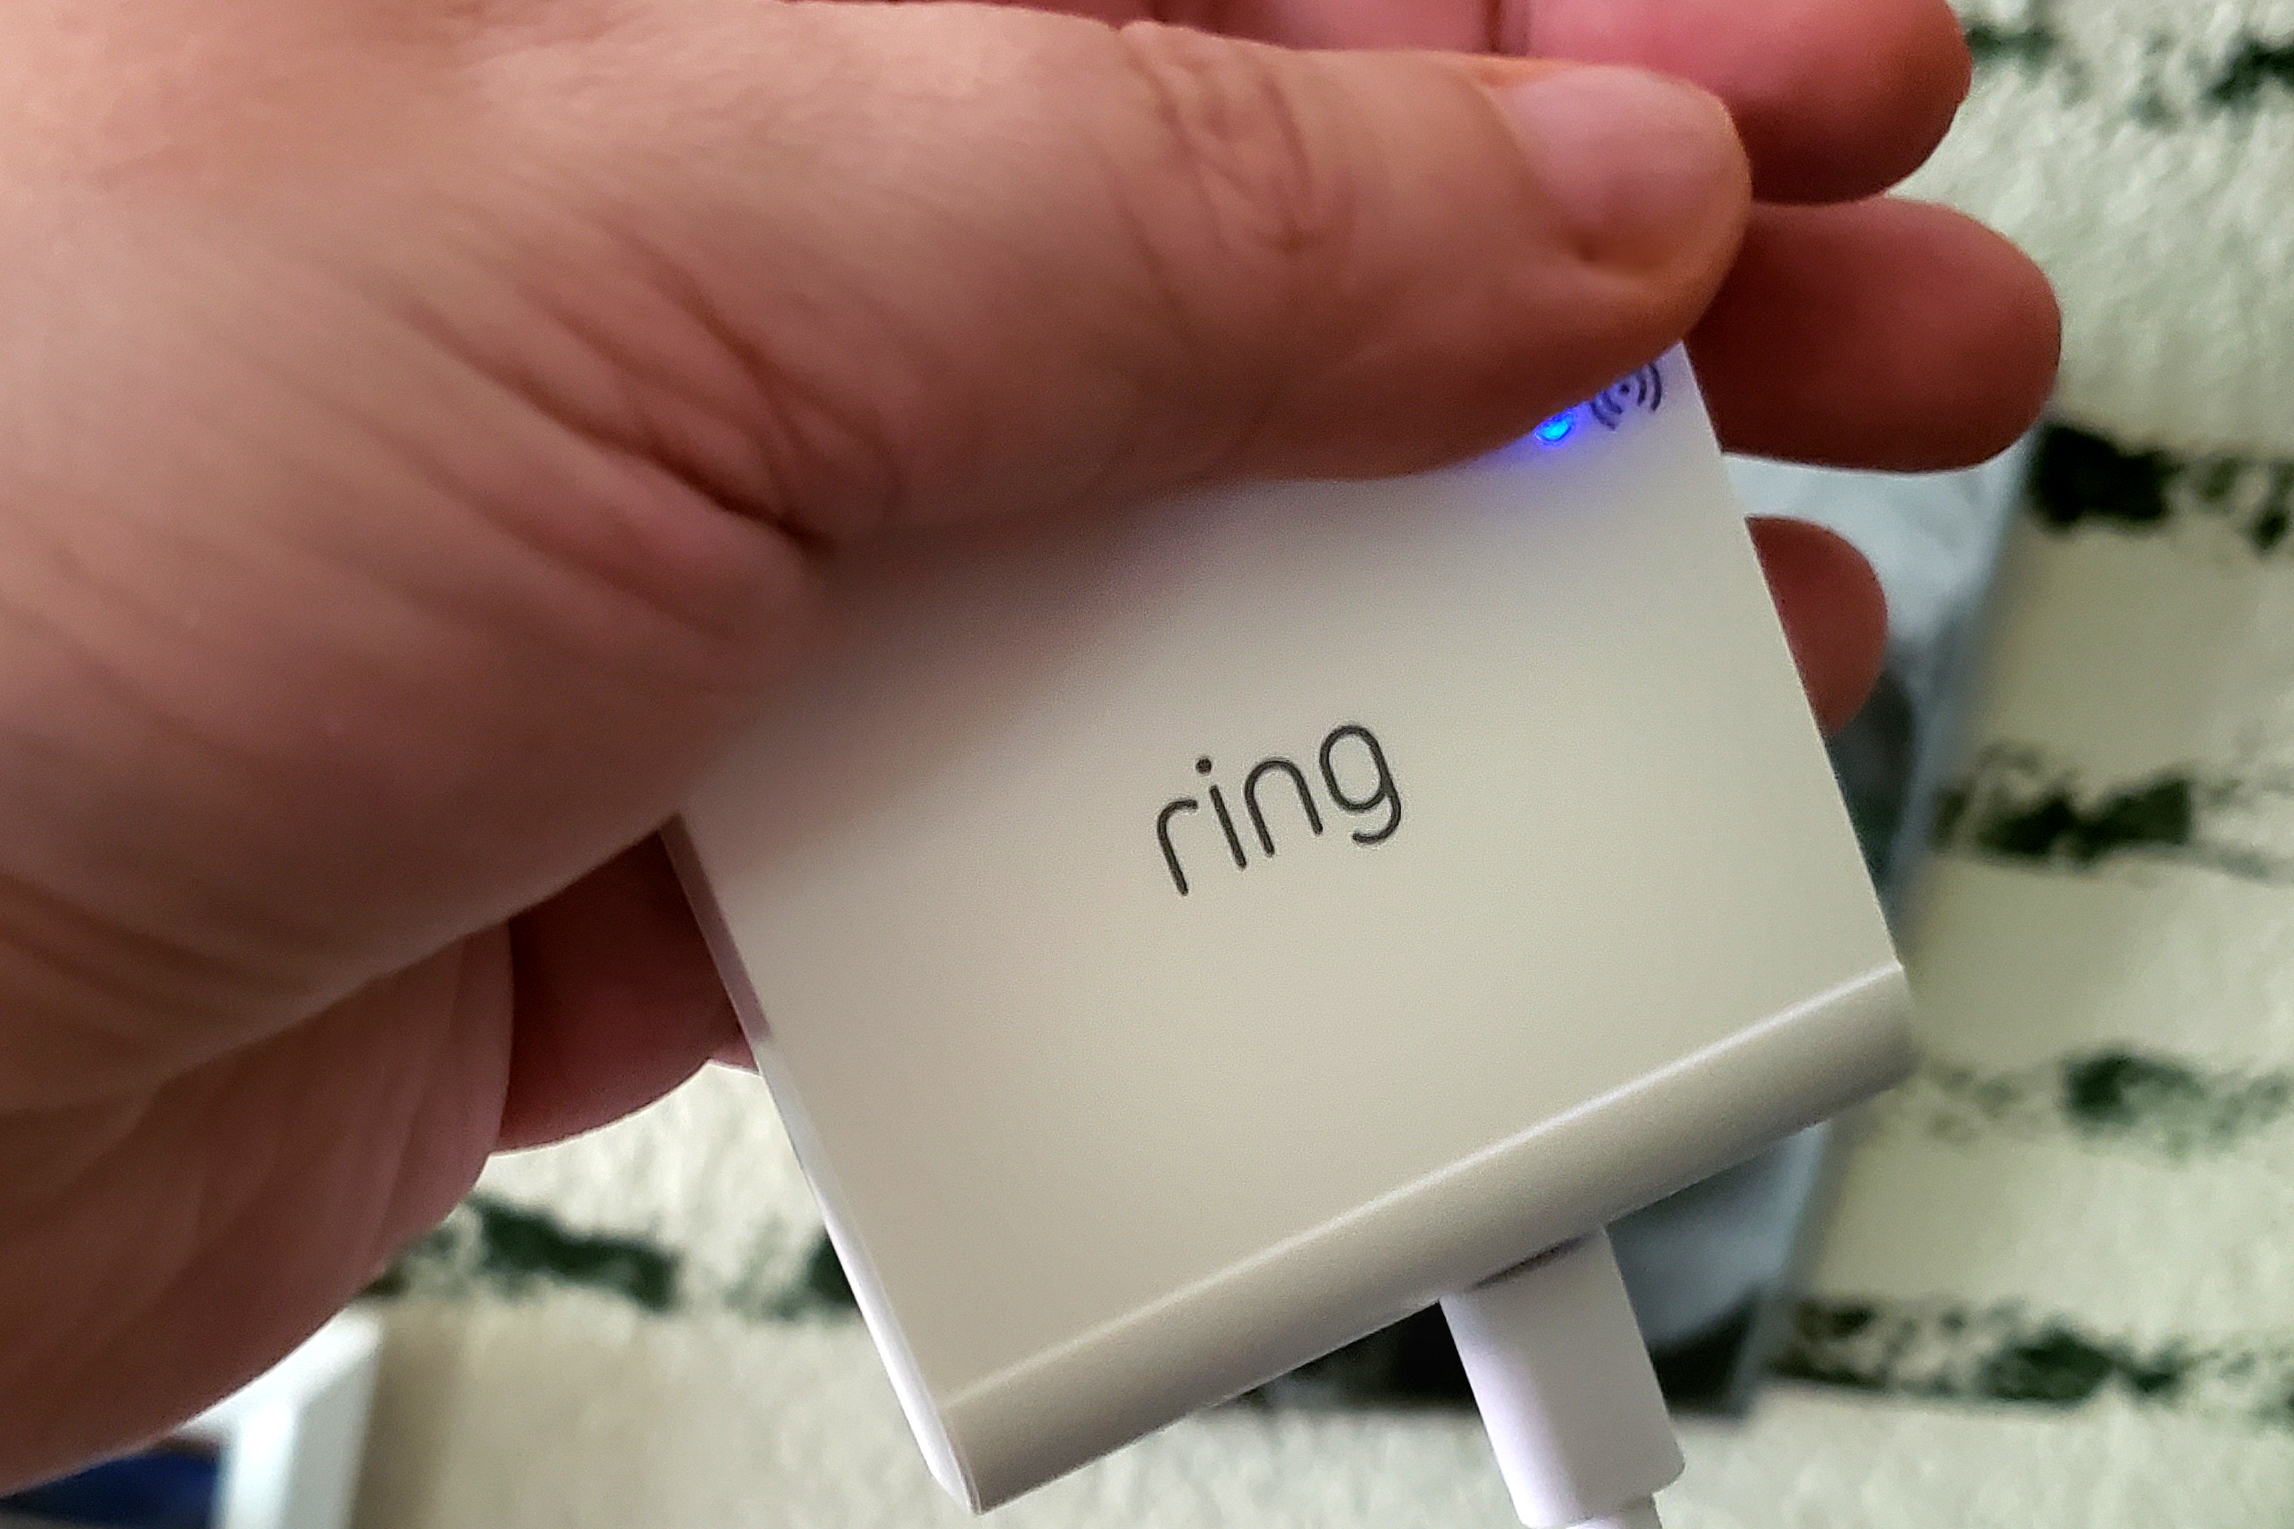 Ring bridge cannot be found or removedb - Smart Lighting - Ring Community